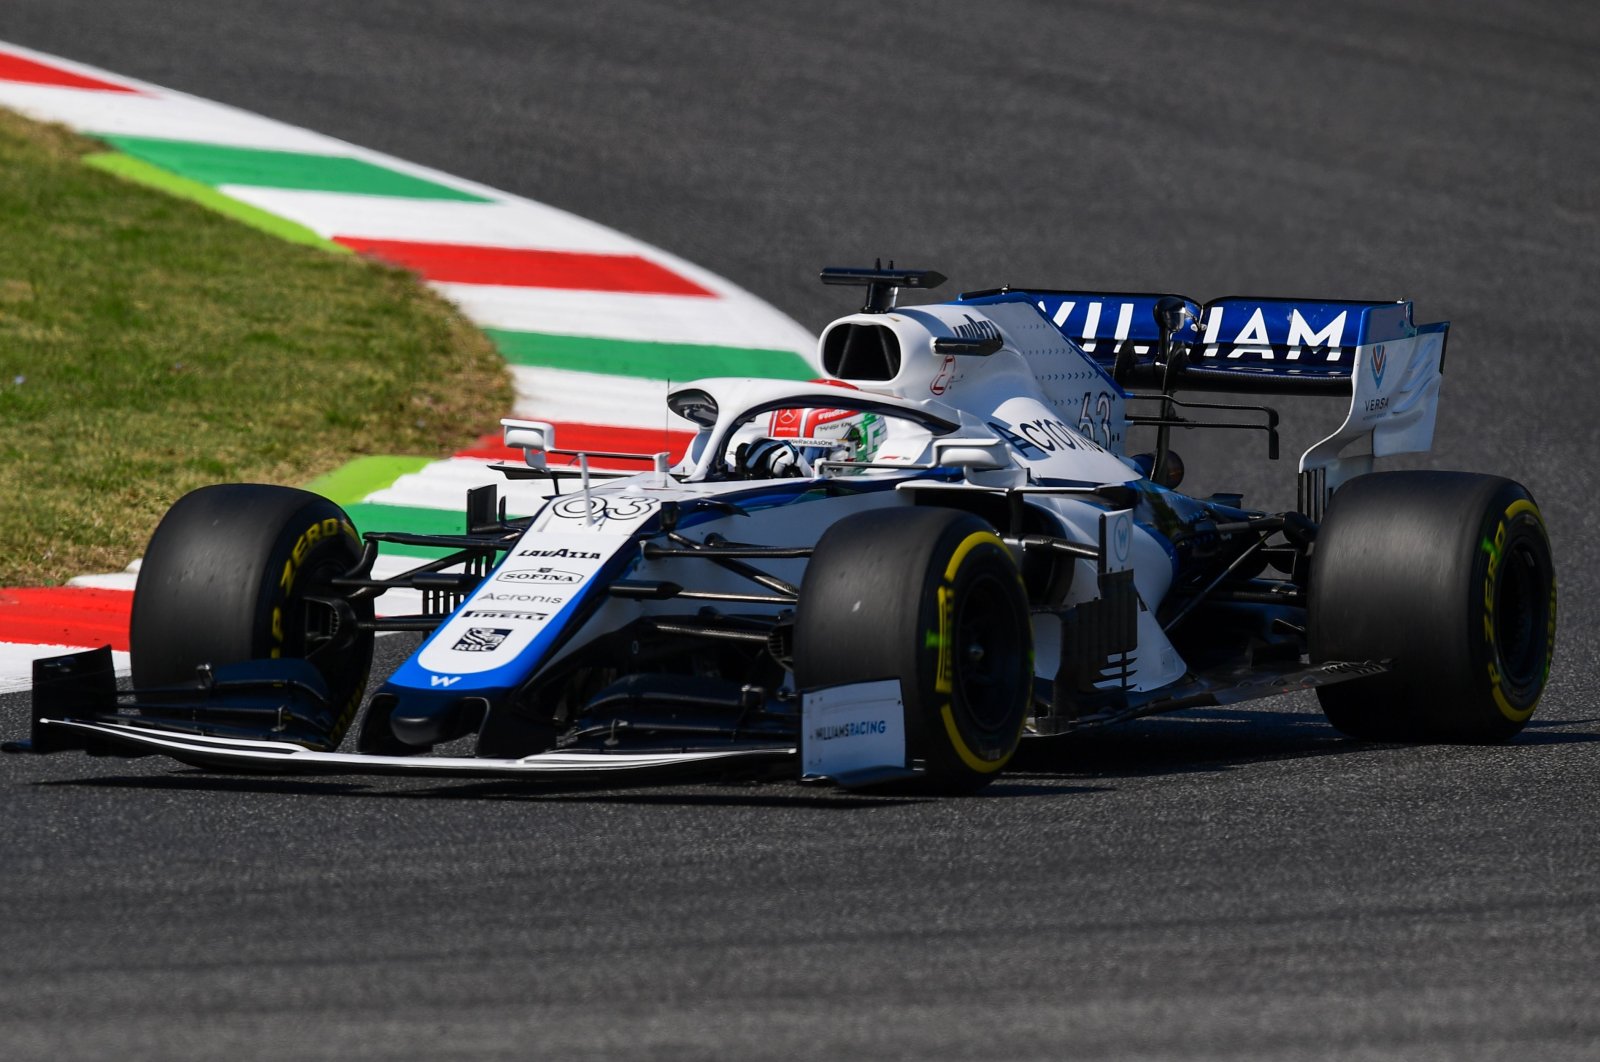 Williams driver George Russell during a practice session ahead of the Tuscan GP in Scarperia, Italy, Sept. 11, 2020. (AFP Photo)